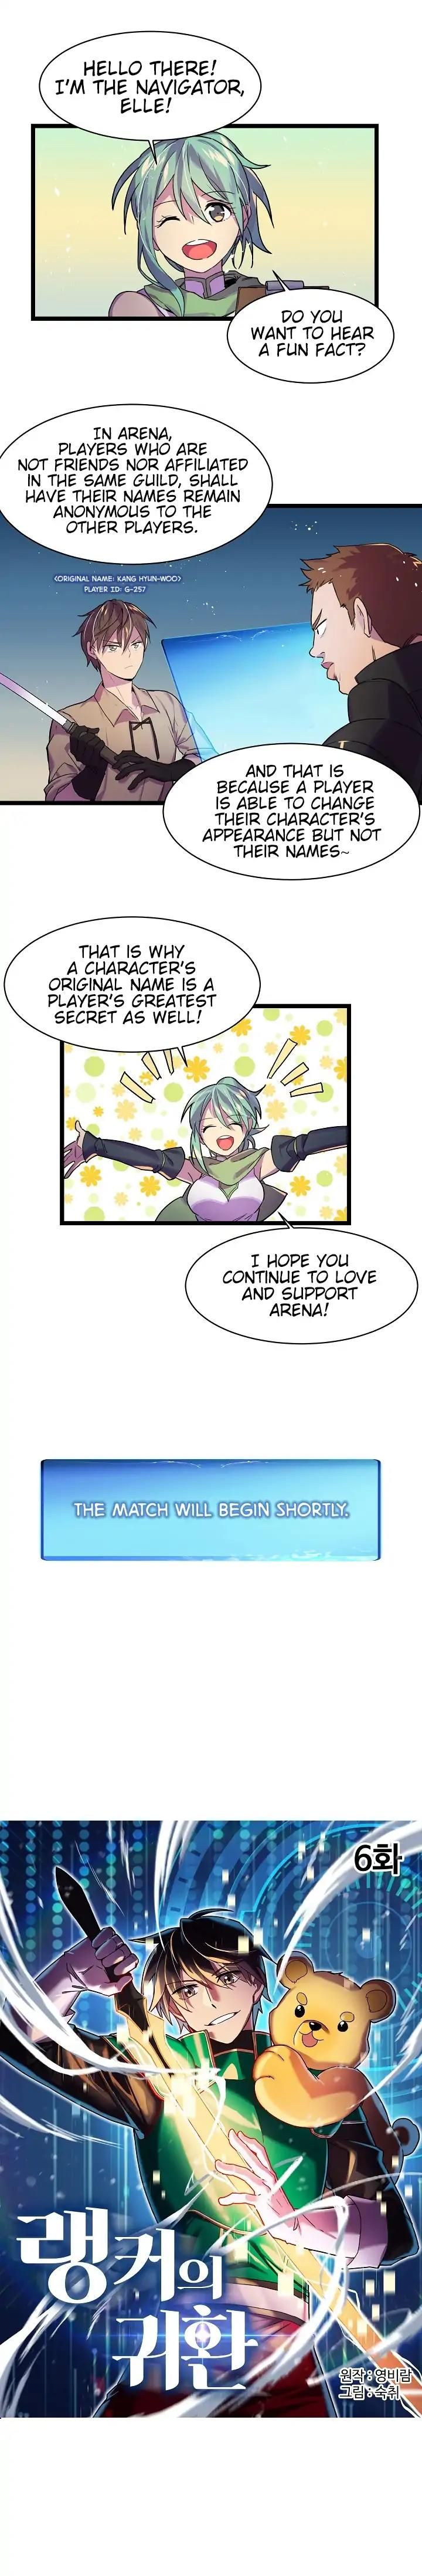 Ranker's Return Chapter 6 page 2